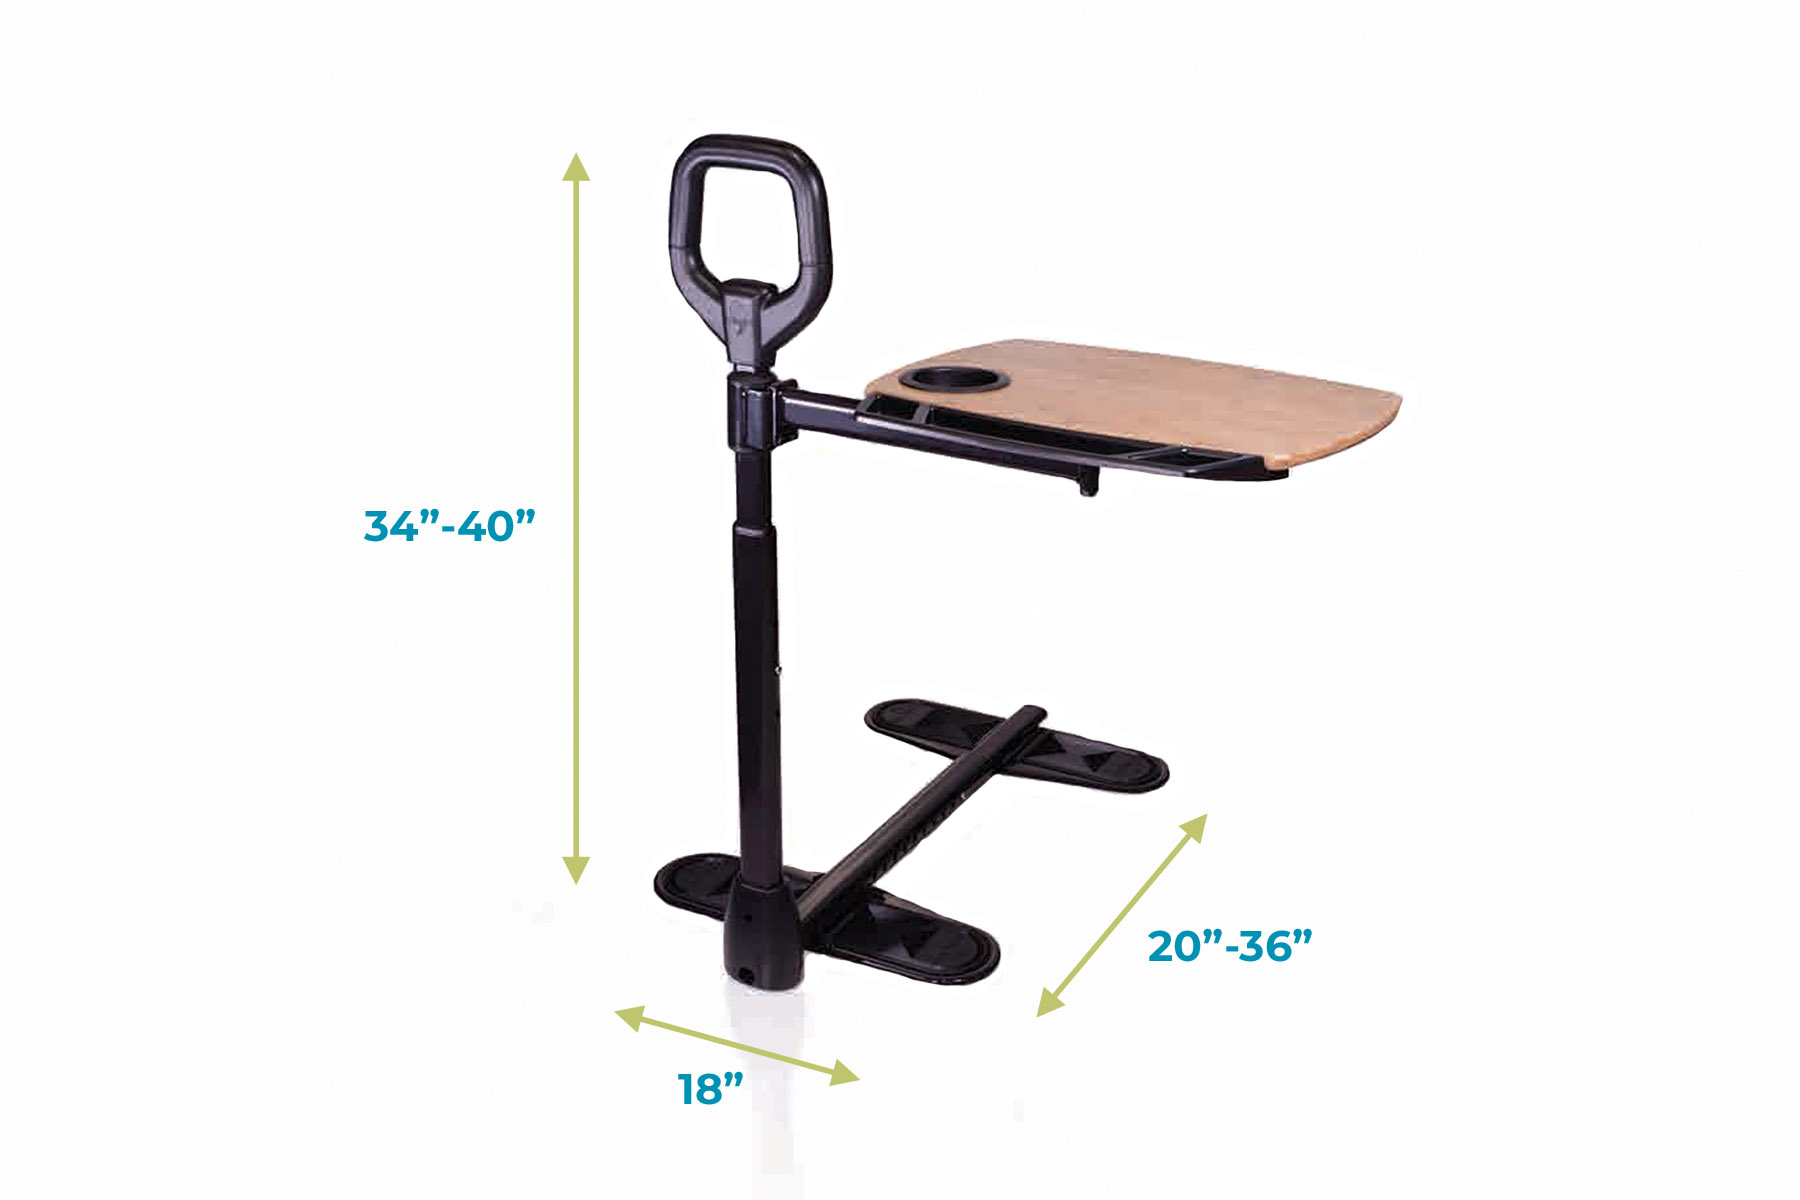 Able Life Universal Stand Assist - Black - Dual Support Cushion Handles -  Easy Standing - Fits Any Couch, Chair, or Recliner in the Safety  Accessories department at